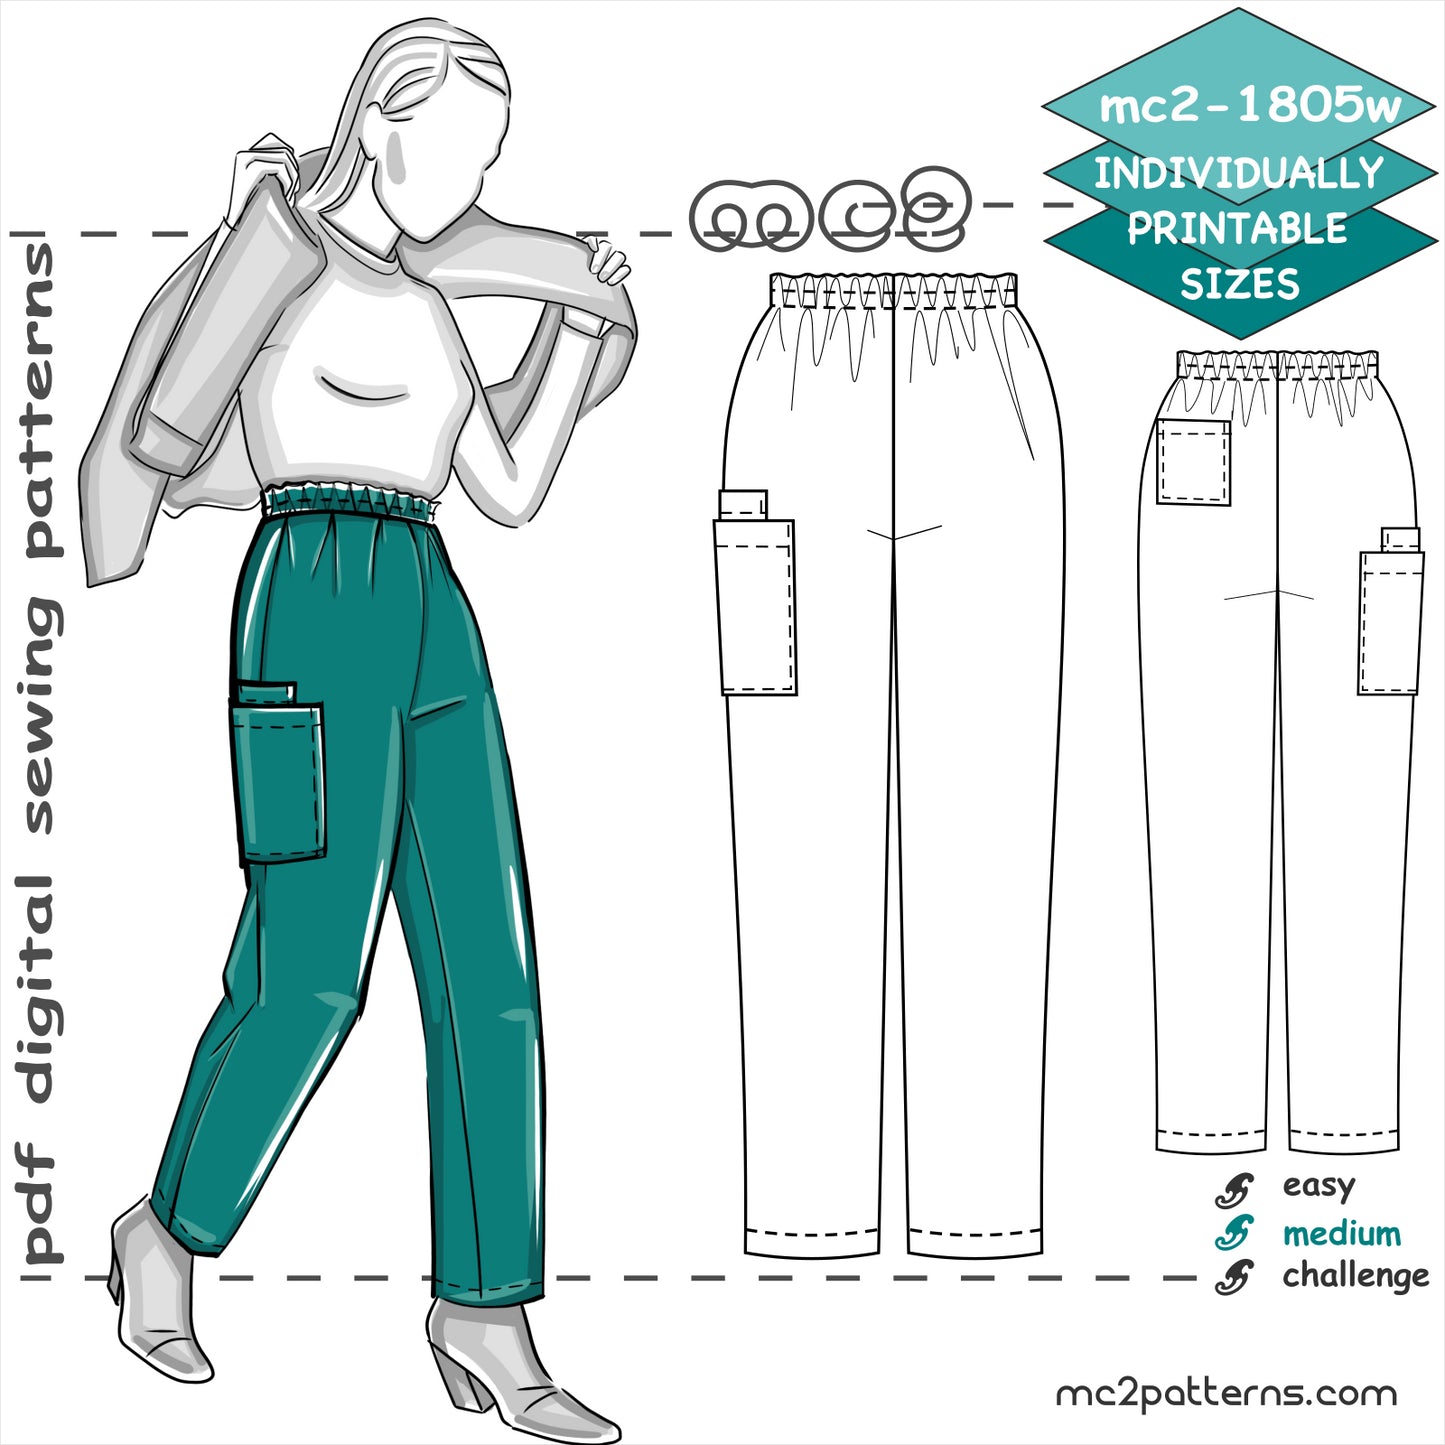 Pull-on Pants/ Scrubs with Cargo Pockets for women – MC2patterns